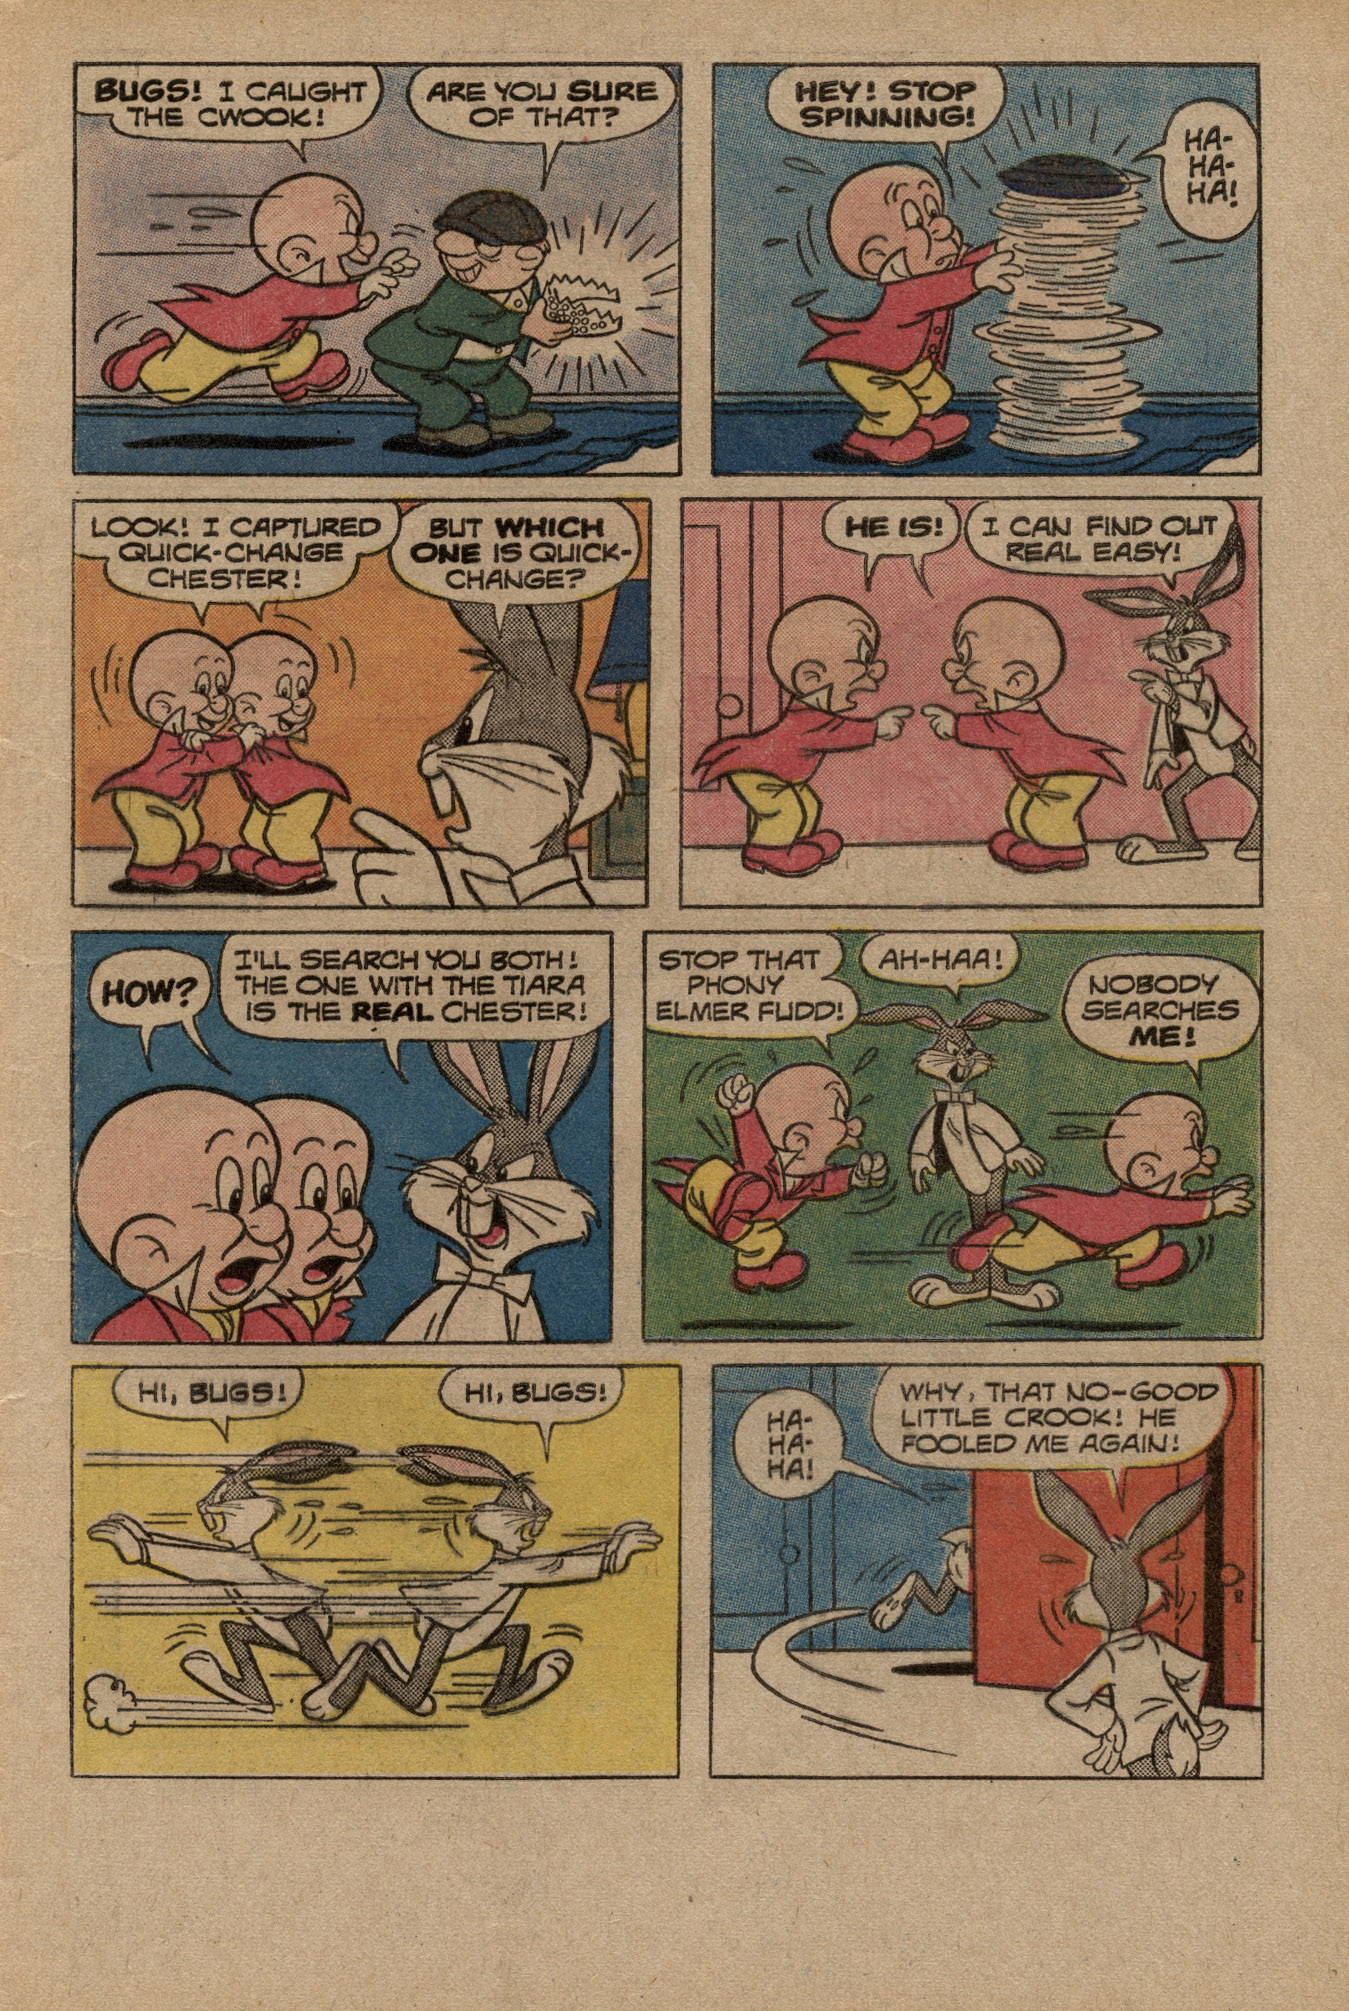 Read online Bugs Bunny comic -  Issue #144 - 5